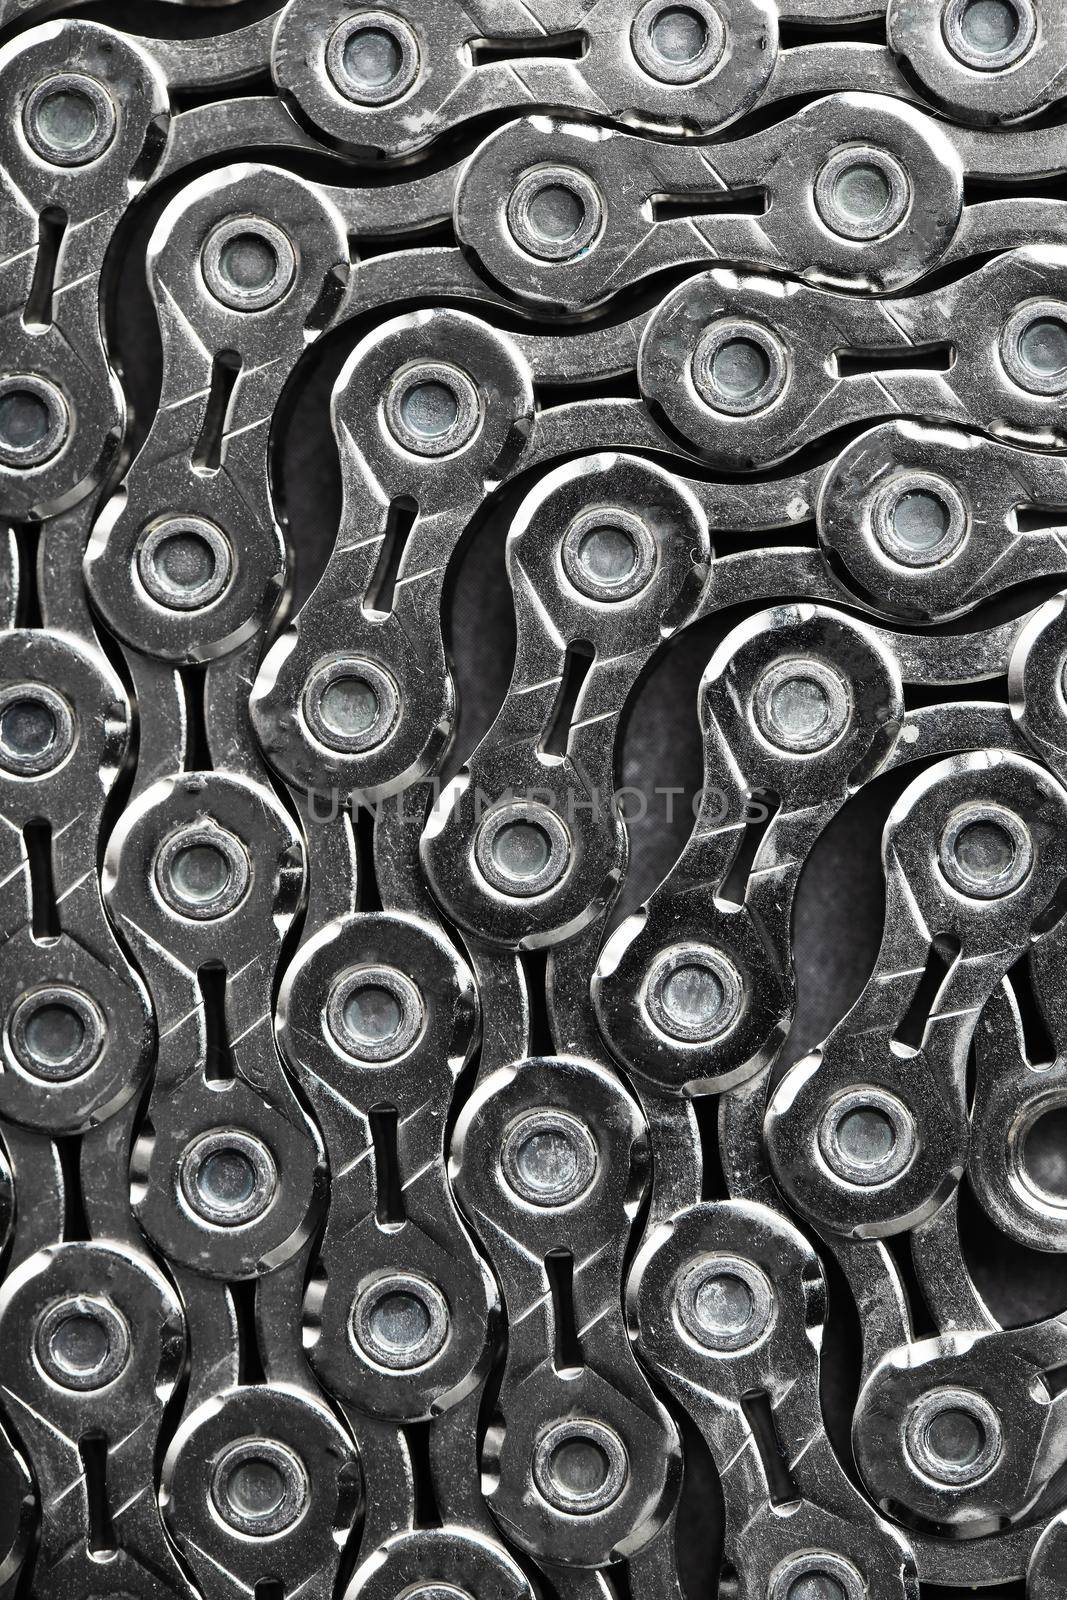 The texture of a bicycle chain is a close-up of the torque transmission links by AlexGrec